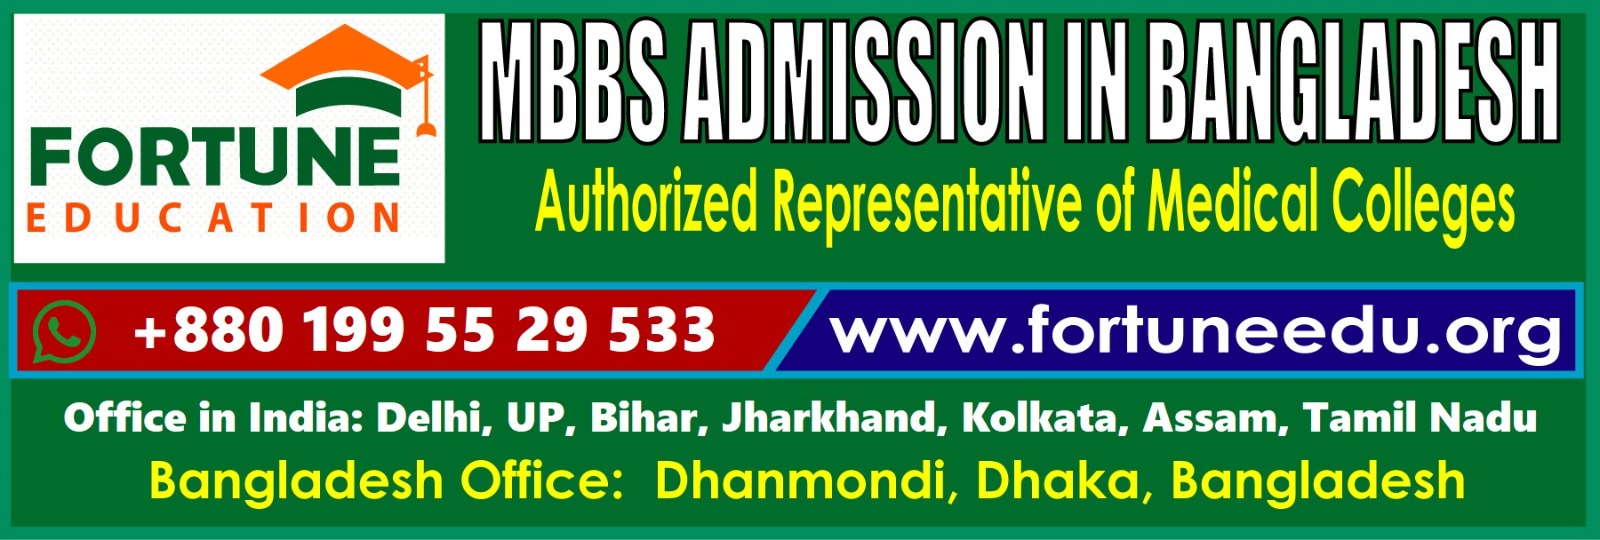 Online MBBS Admission in Bangladesh